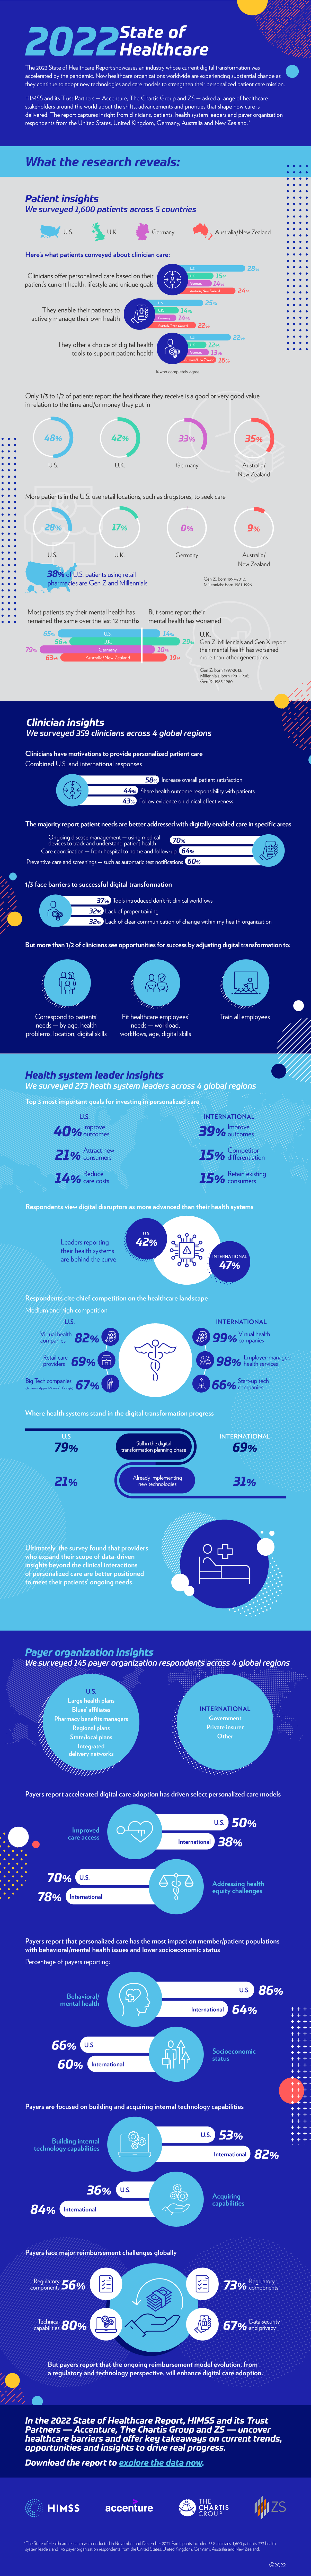 HIMSS State of Healthcare Report Infographic